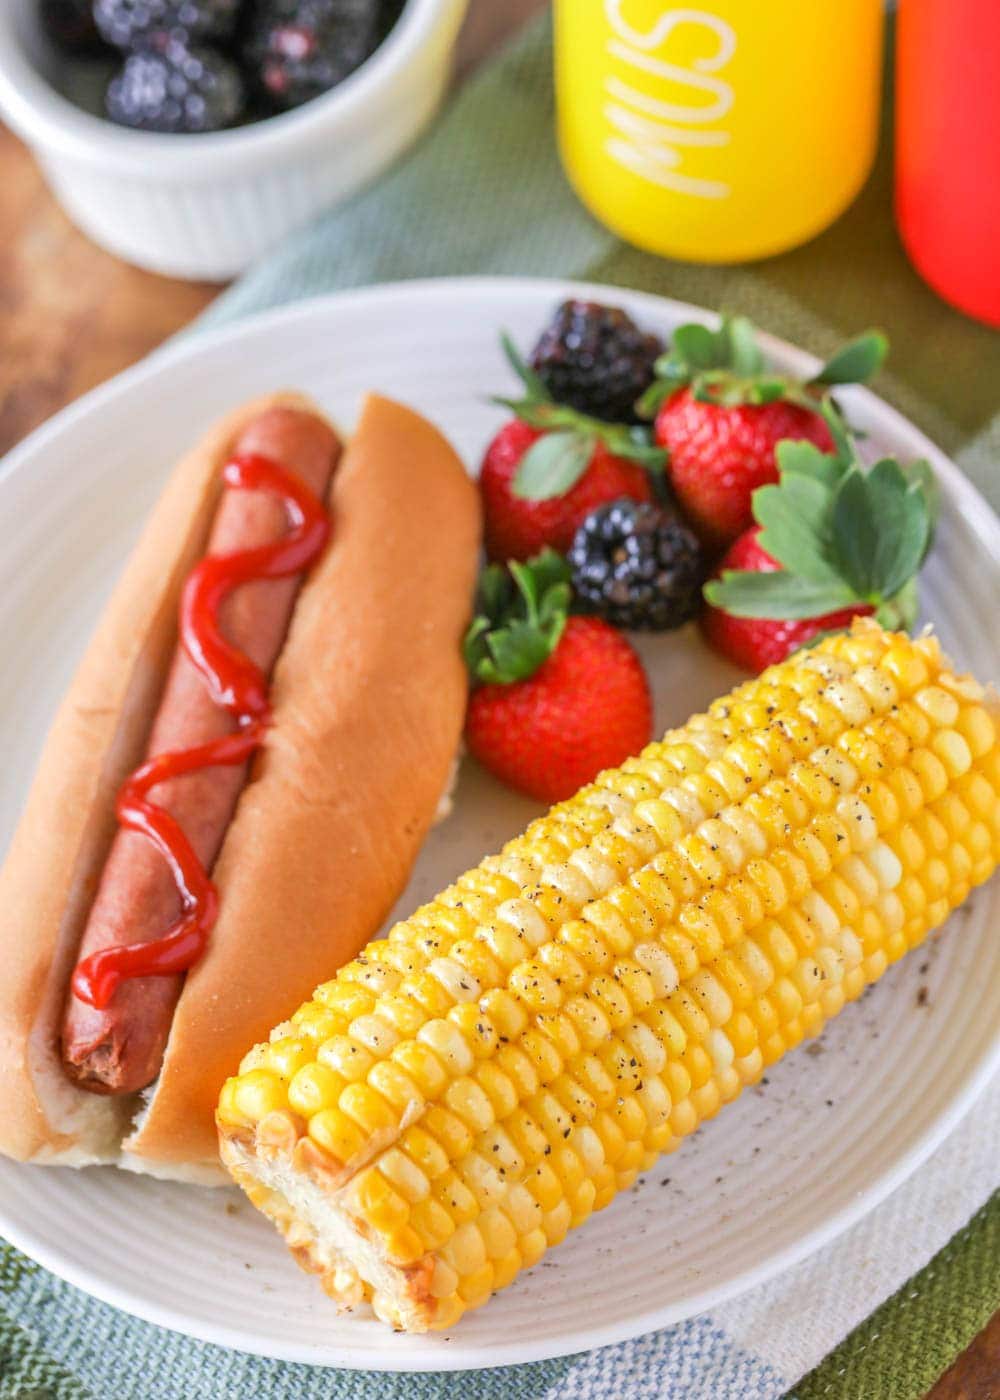 Microwave corn on the cob served with a hot dog and fruit